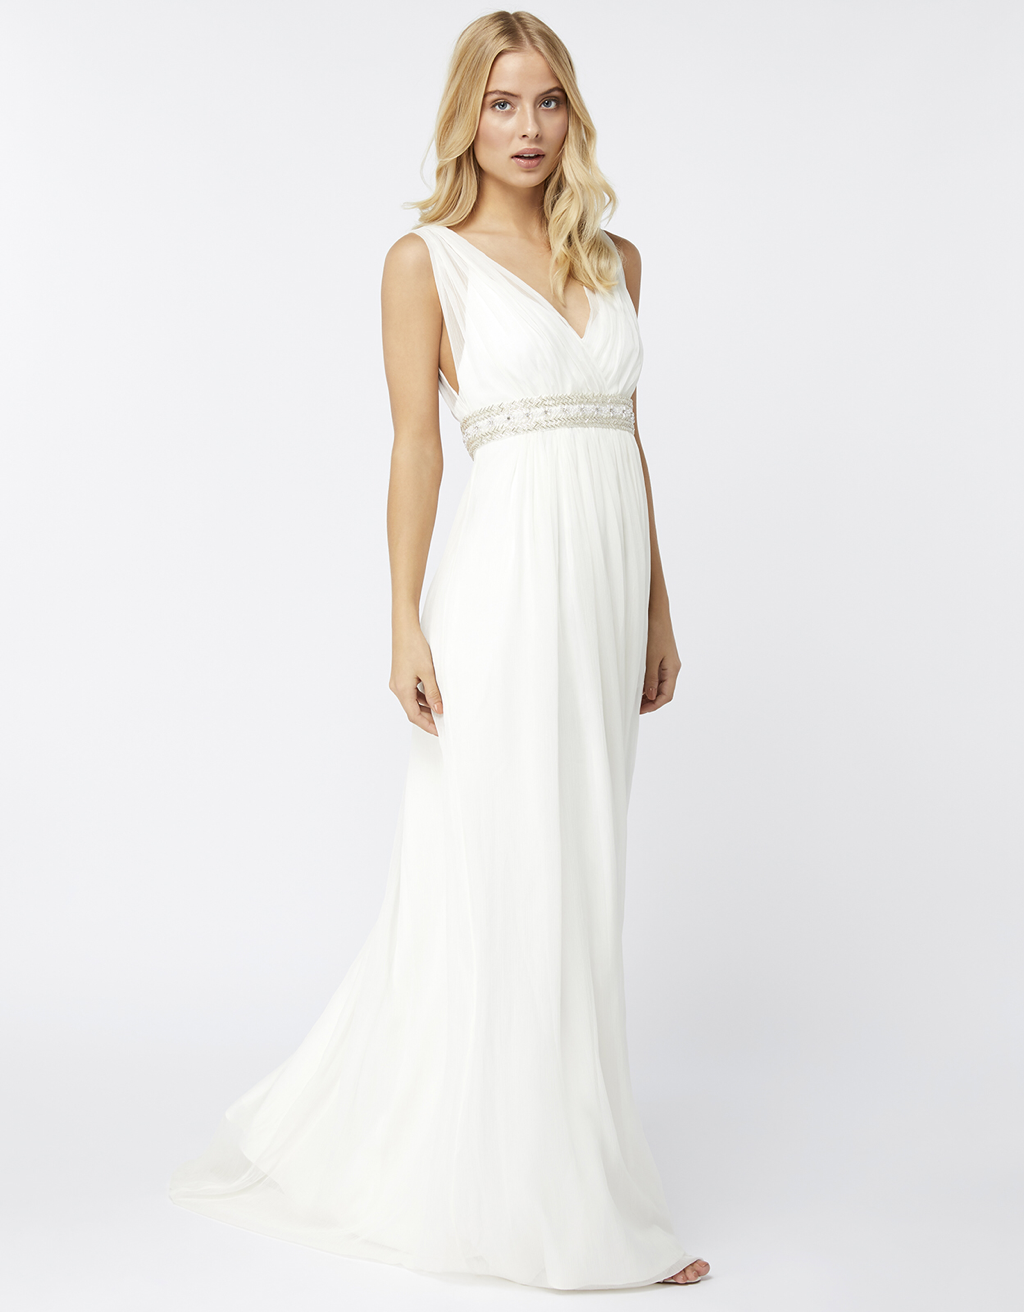 Top Grecian Wedding Dress of the decade The ultimate guide 